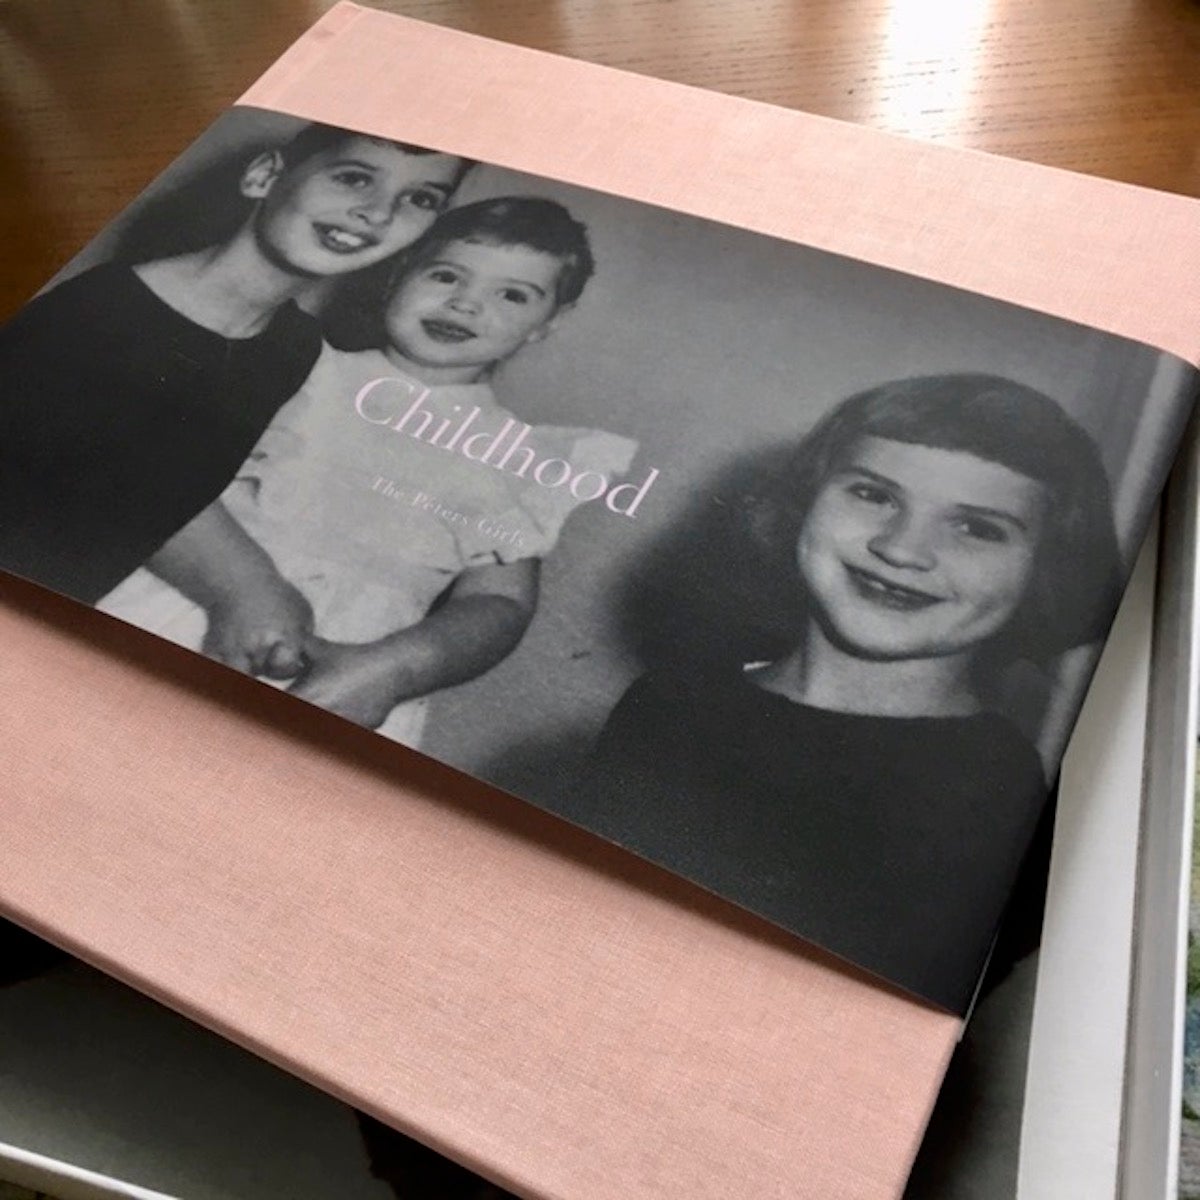 Artifact Uprising Hardcover Photo Book titled Childhood featuring black and white cover photo with three siblings together